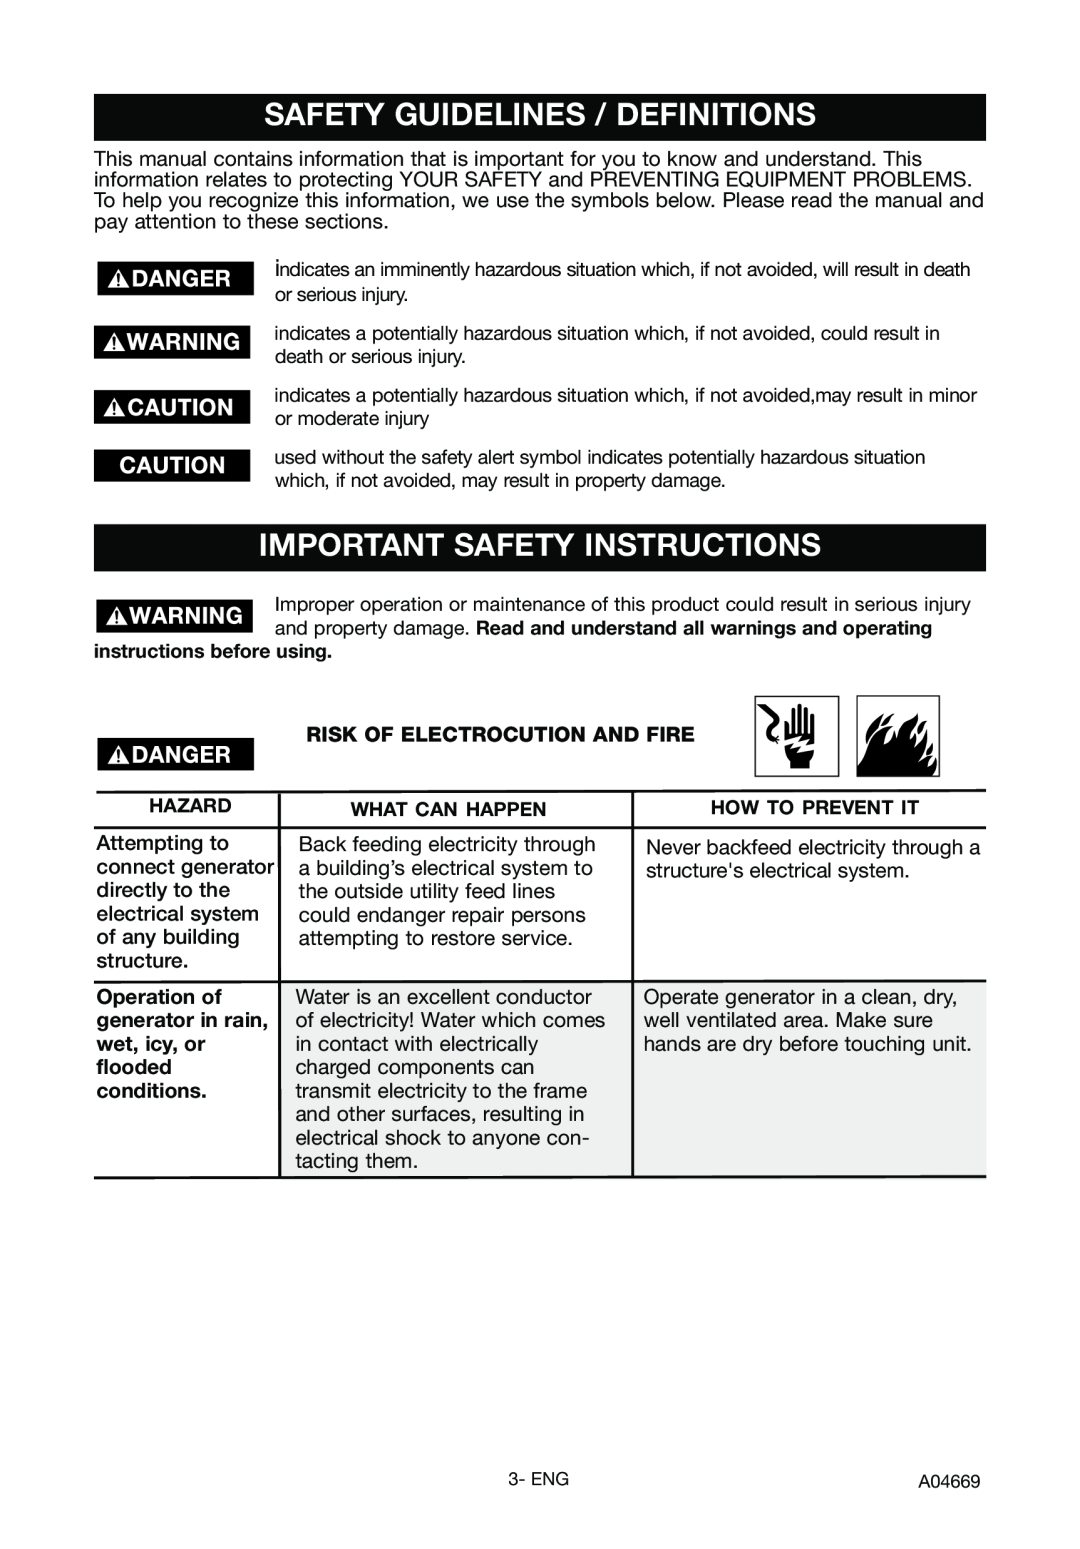 DeVillbiss Air Power Company A04669 Safety Guidelines / Definitions, Important Safety Instructions, Operation of, flooded 